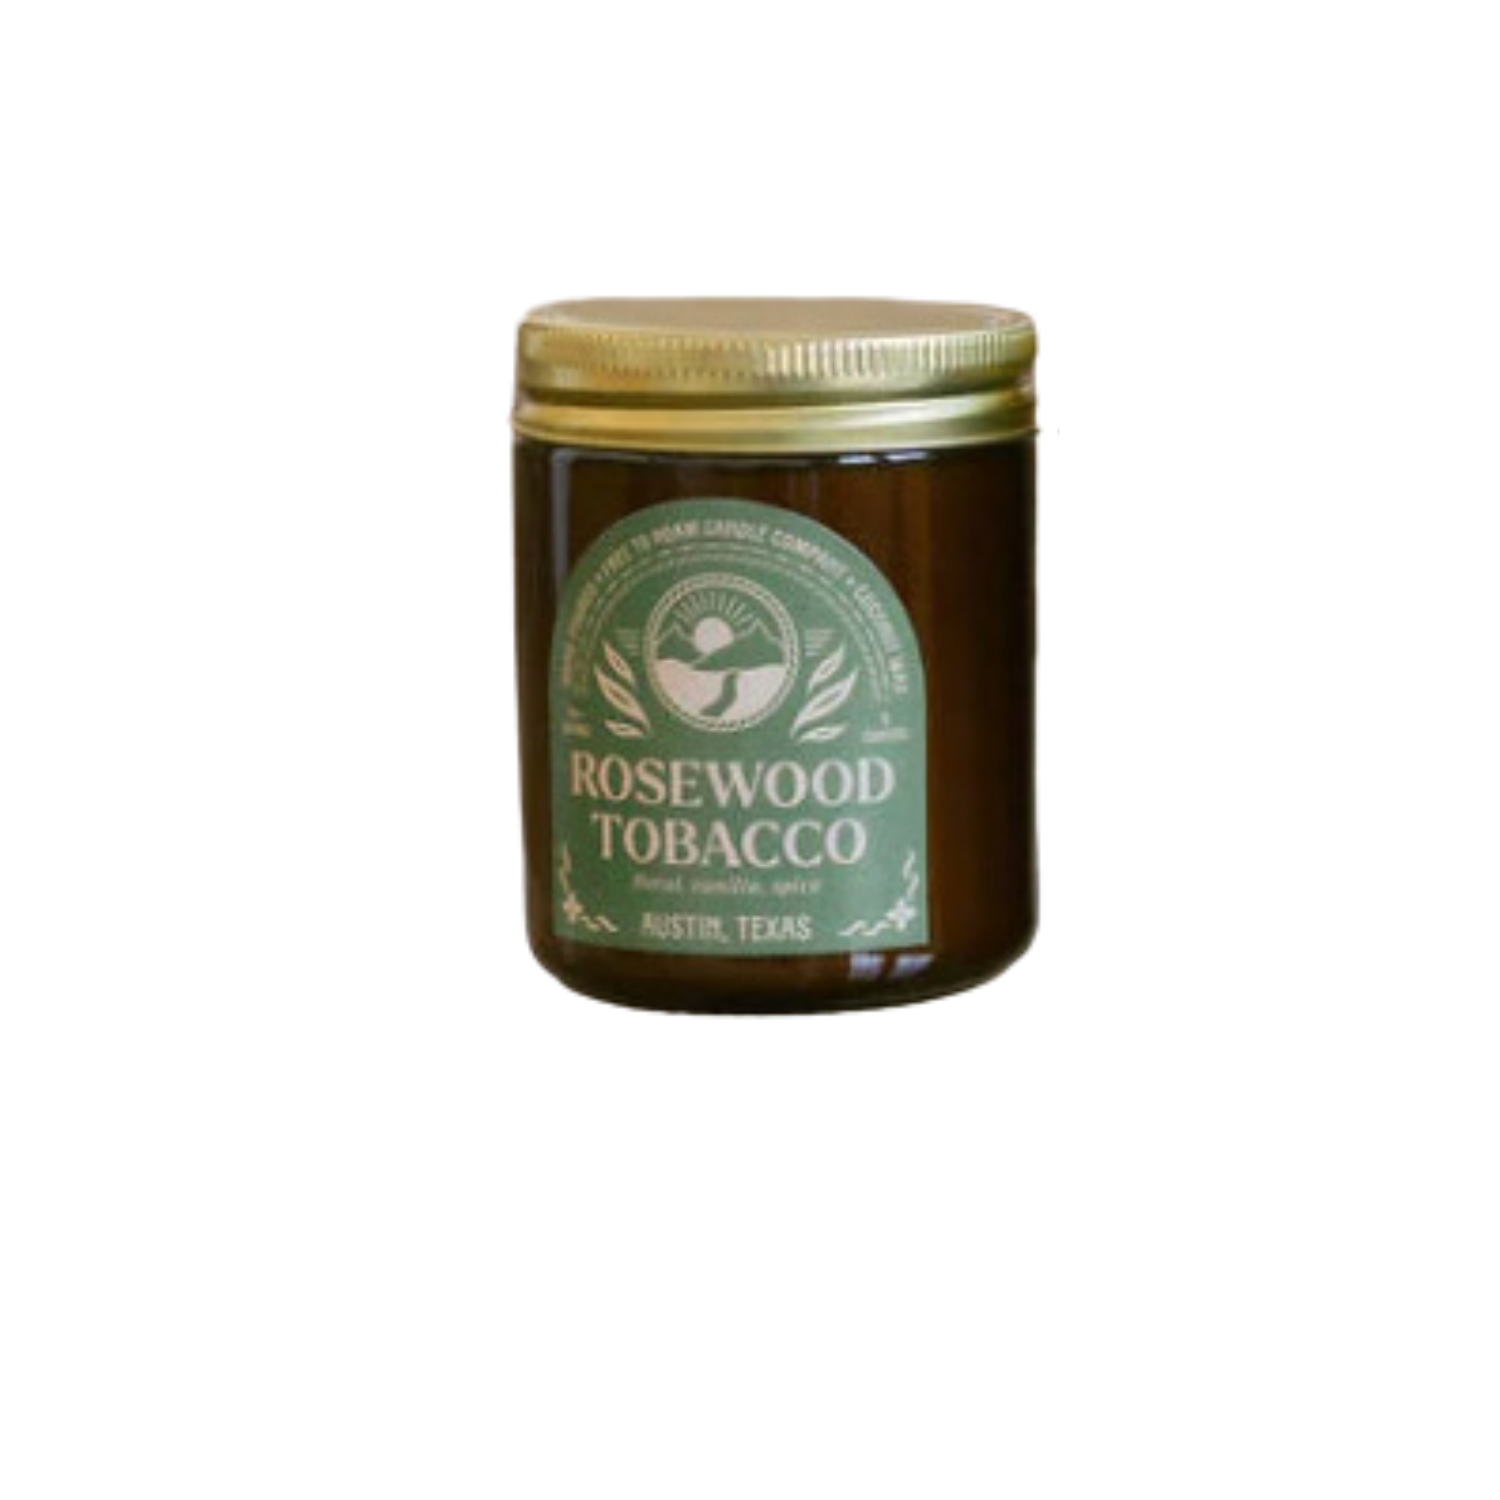 Rosewood and Tobacco Candle